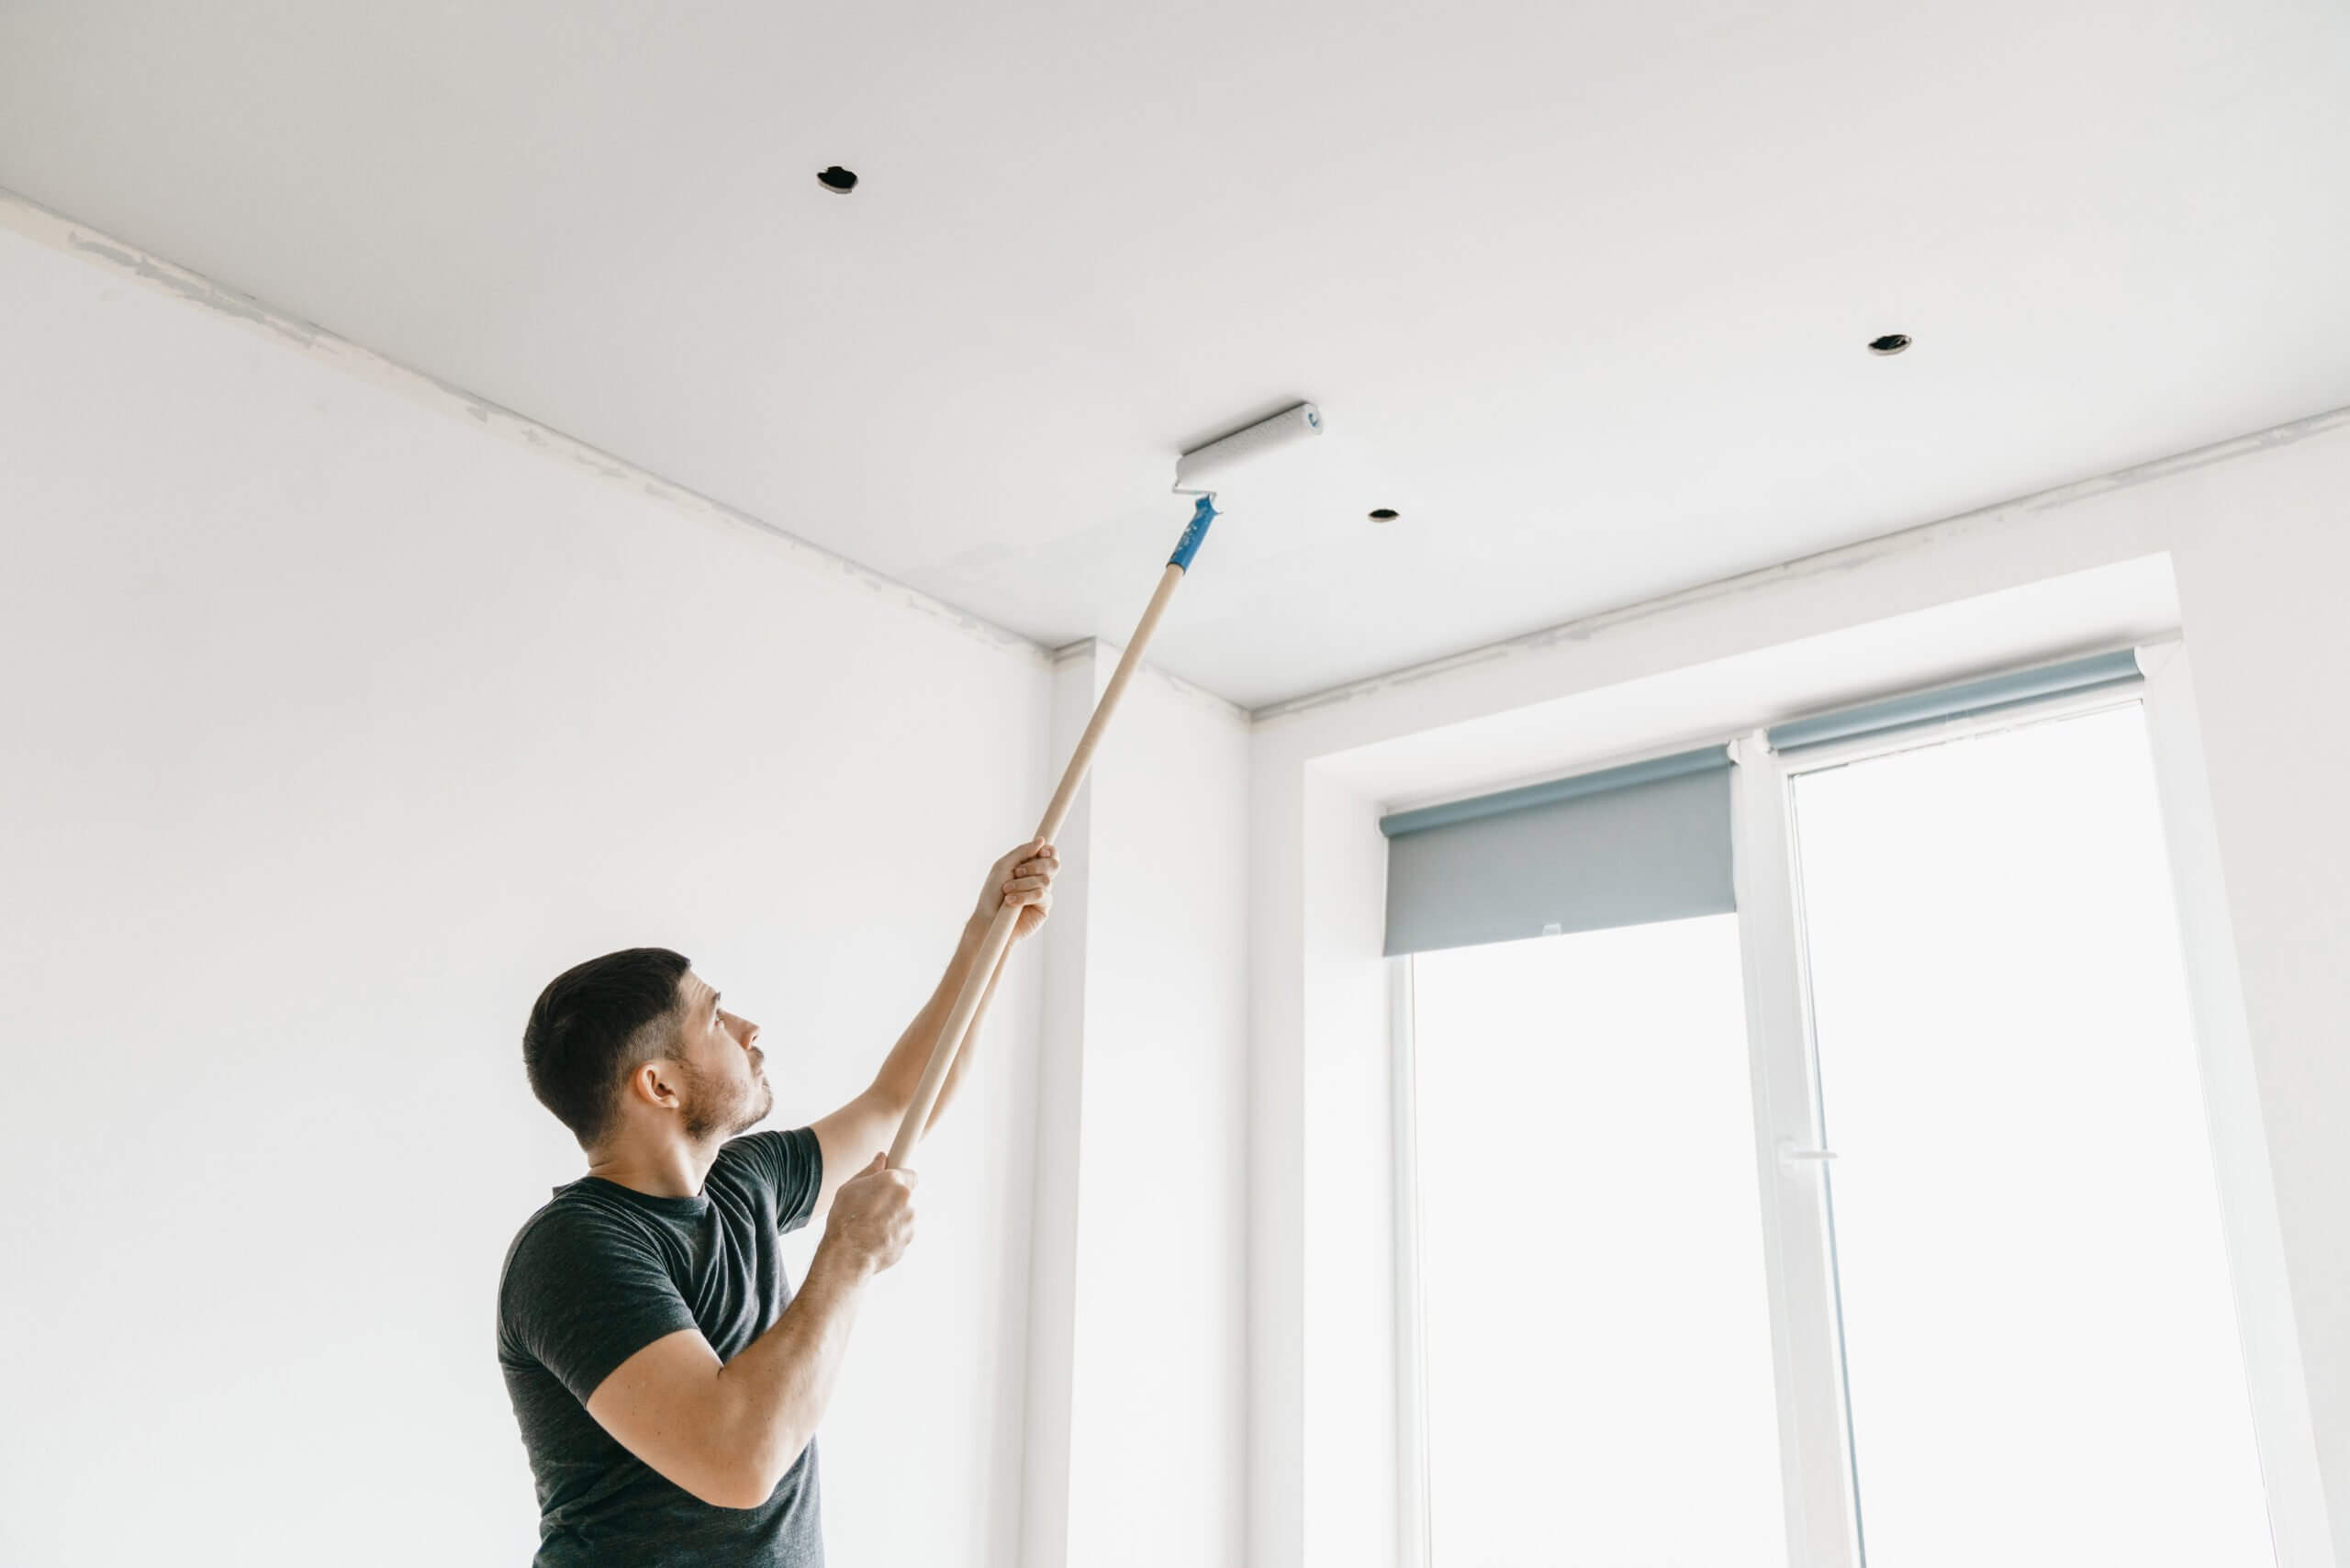 Smooth Ceiling Finish-Palm Beach Gardens Popcorn Ceiling Removal & Drywall Experts